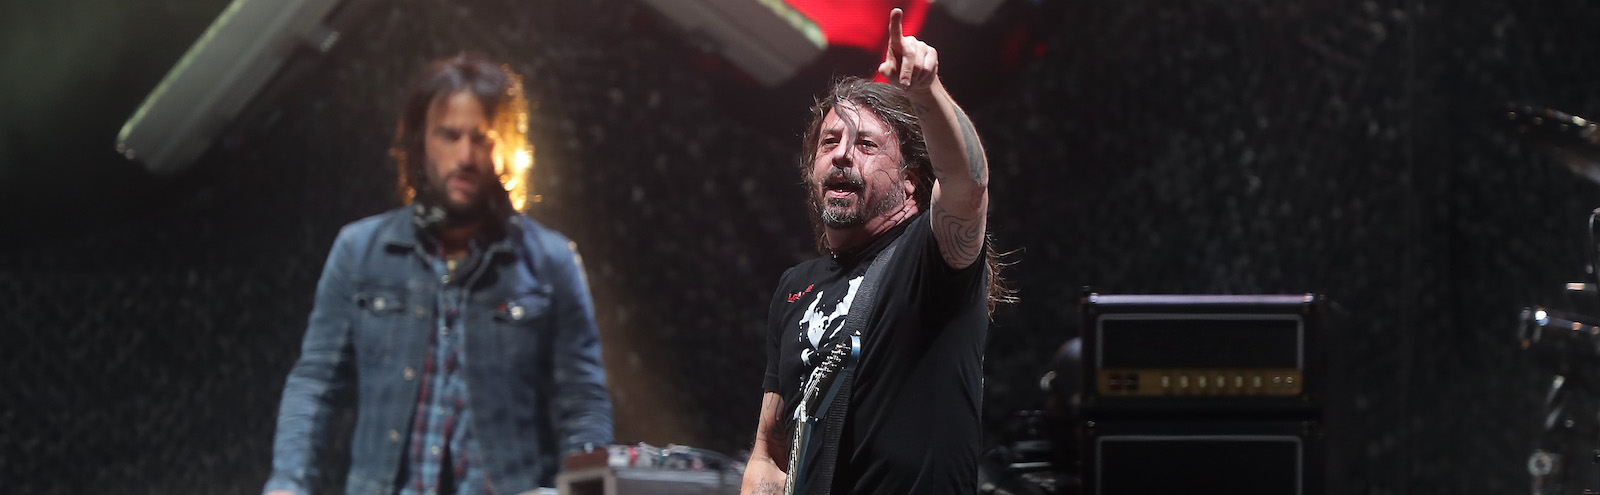 Dave Grohl Foo Fighters 2022 show